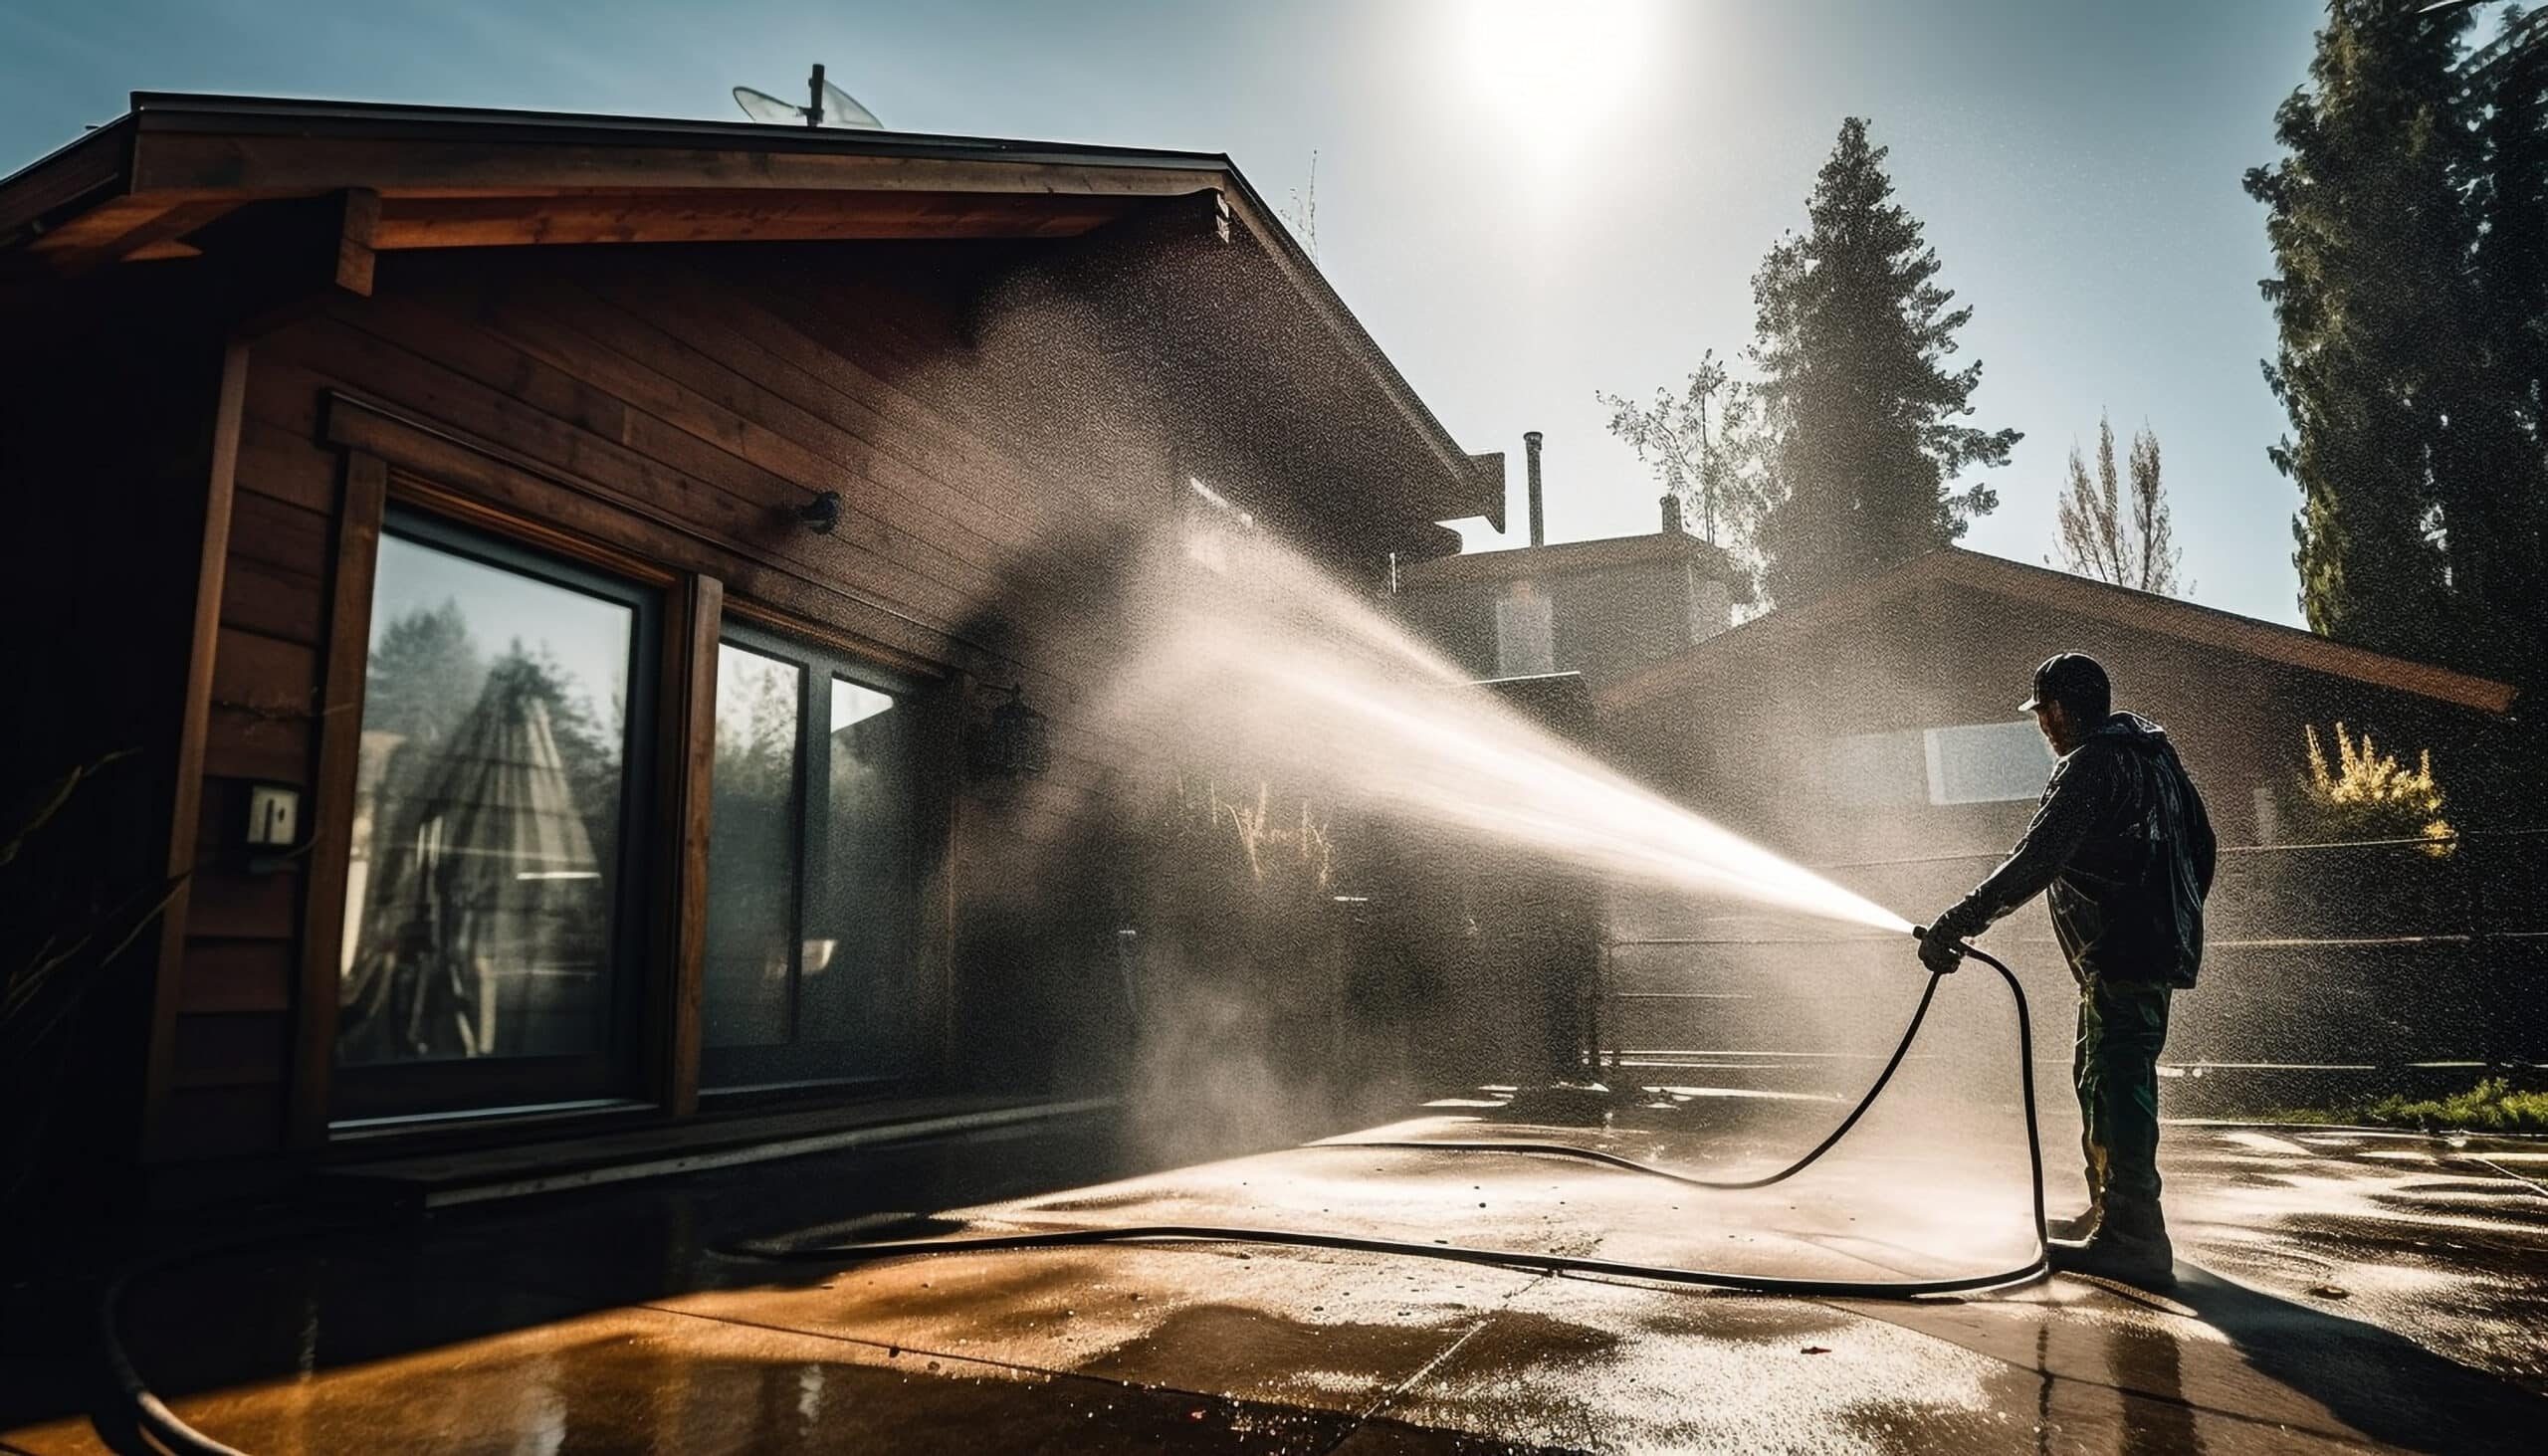 www.appr.com : What safety precautions should I take when using an electric pressure washer?